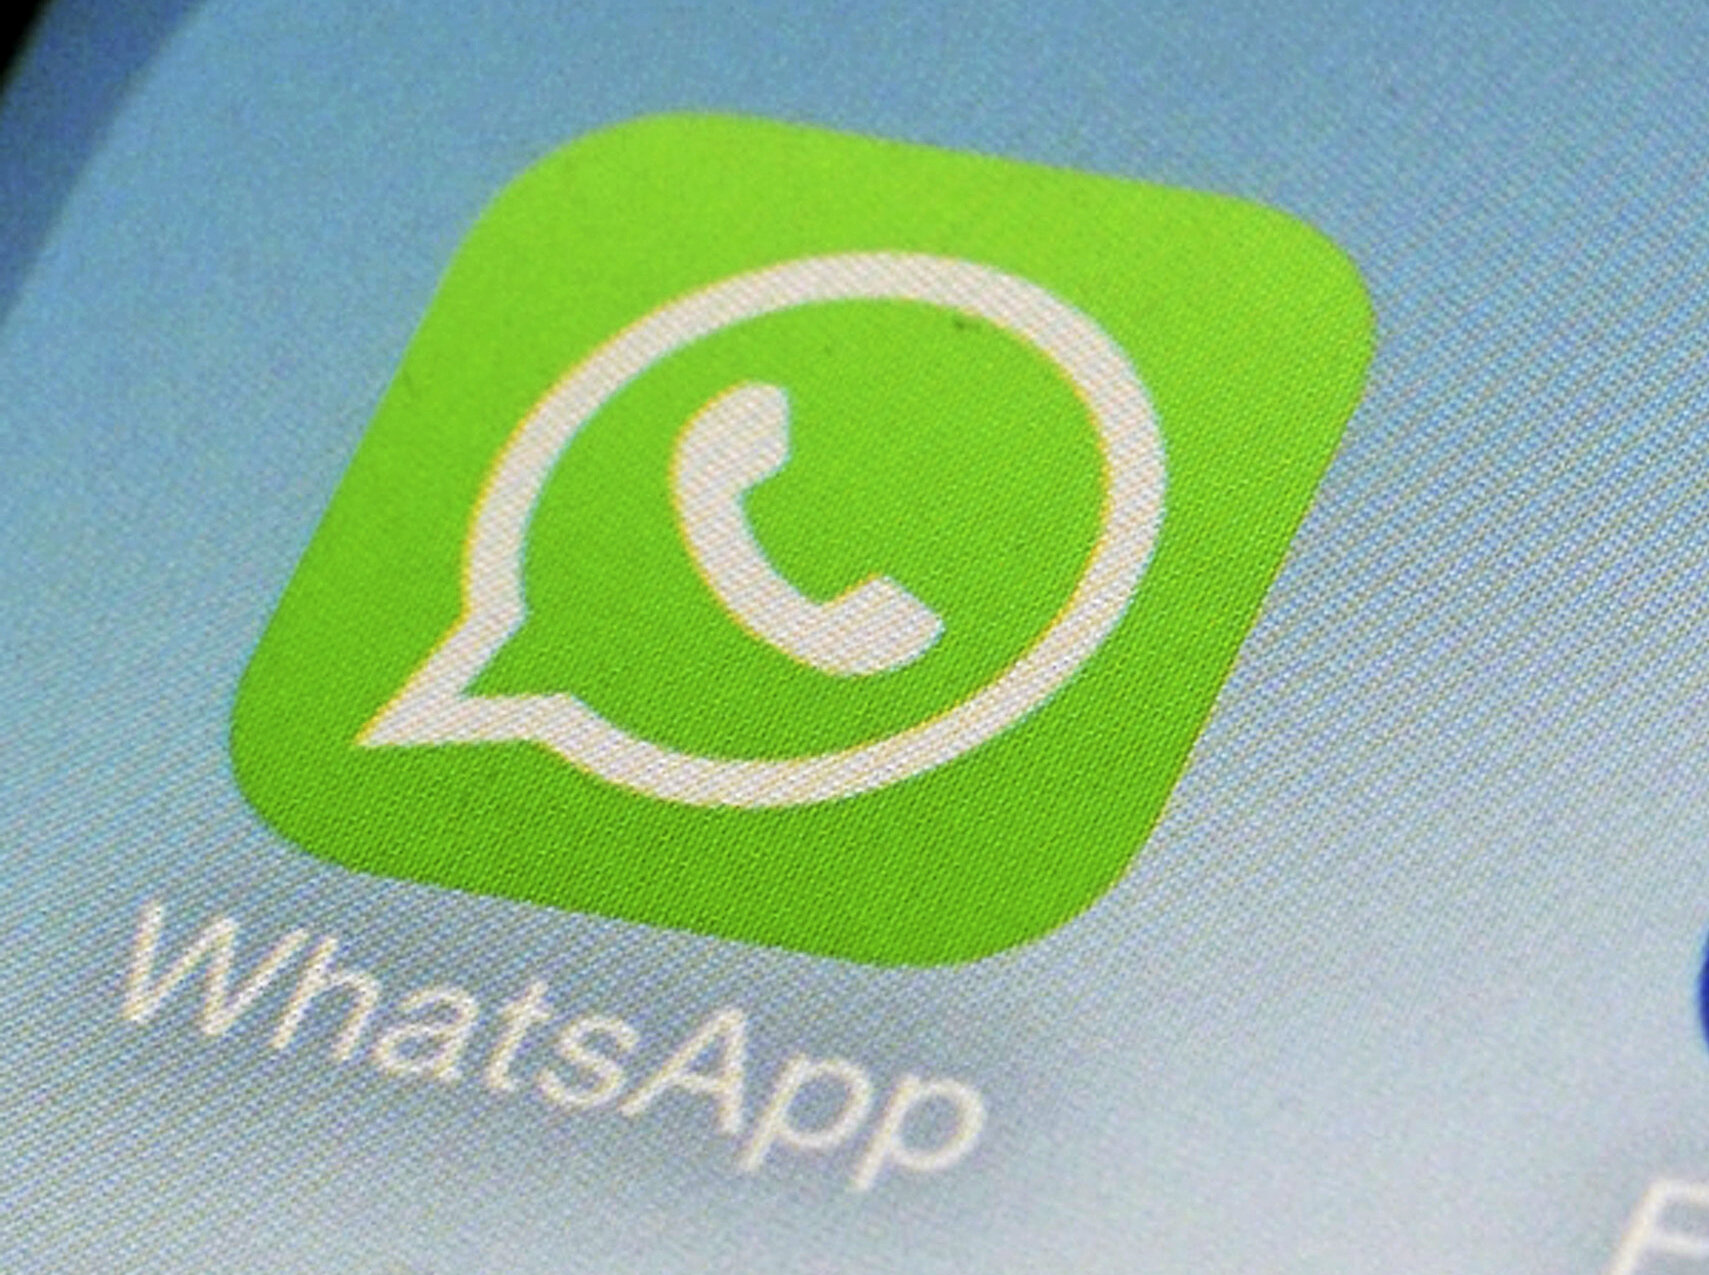 #WhatsApp adds messaging tools to attract businesses